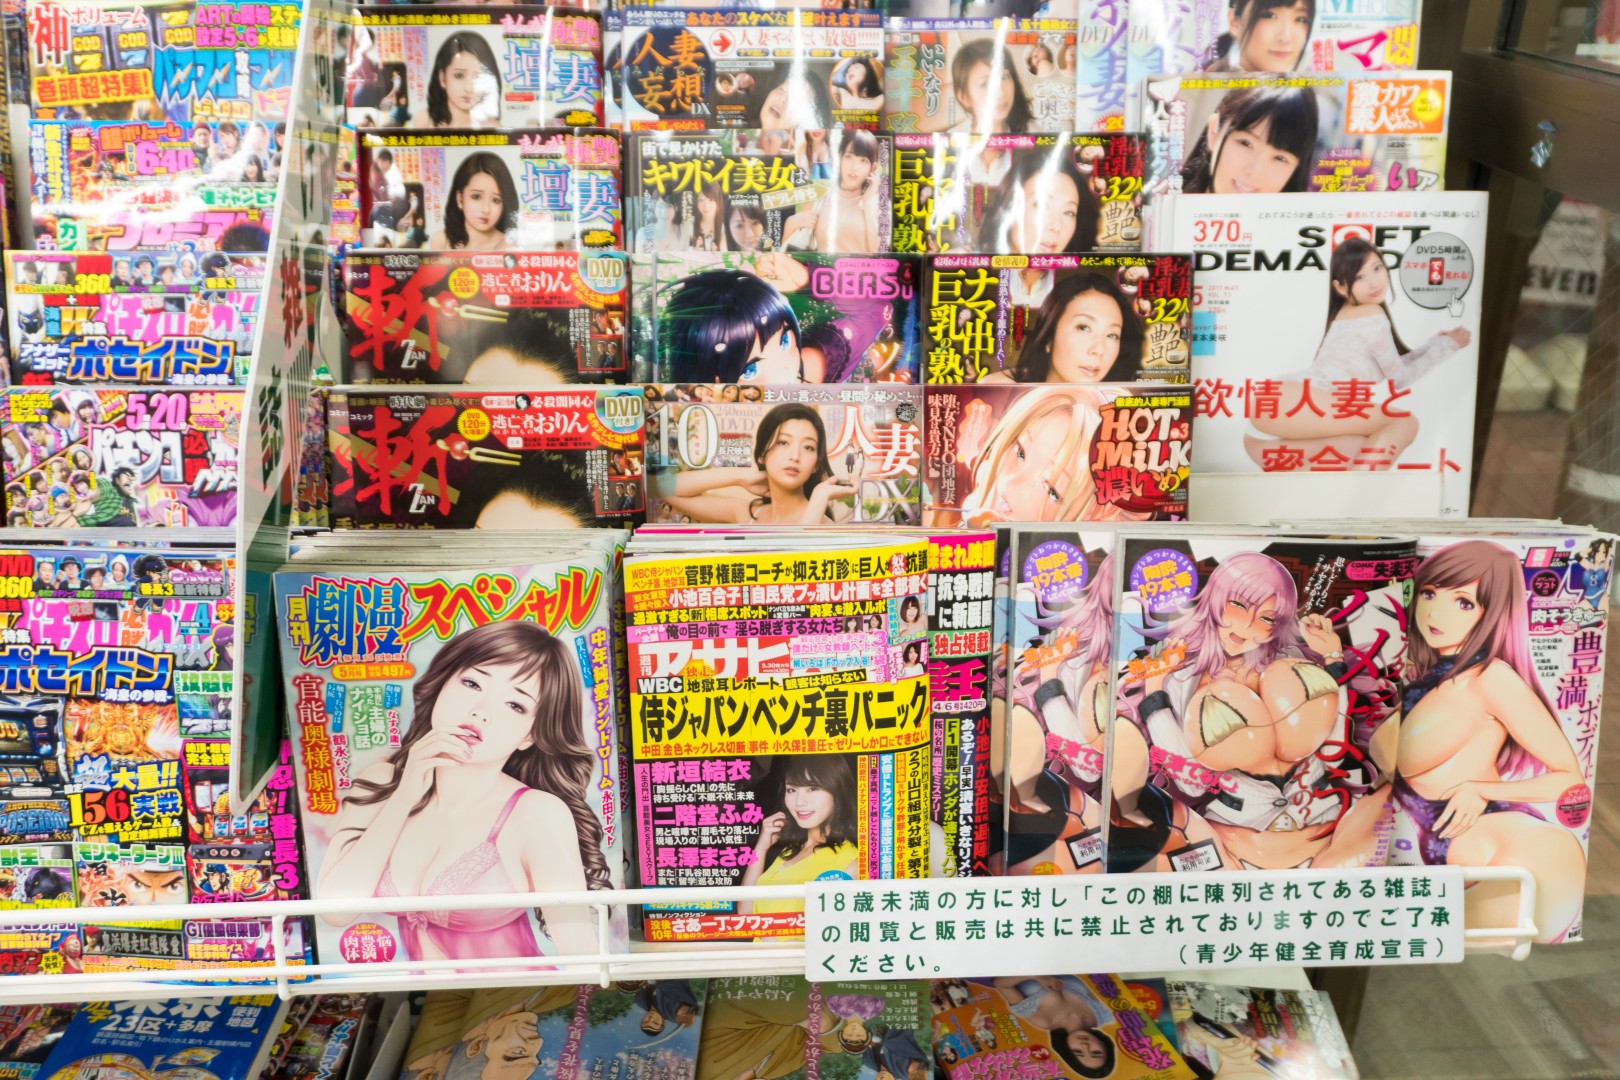 Naked Beach In The World - Porn free: Japan to take adult magazines off convenience ...